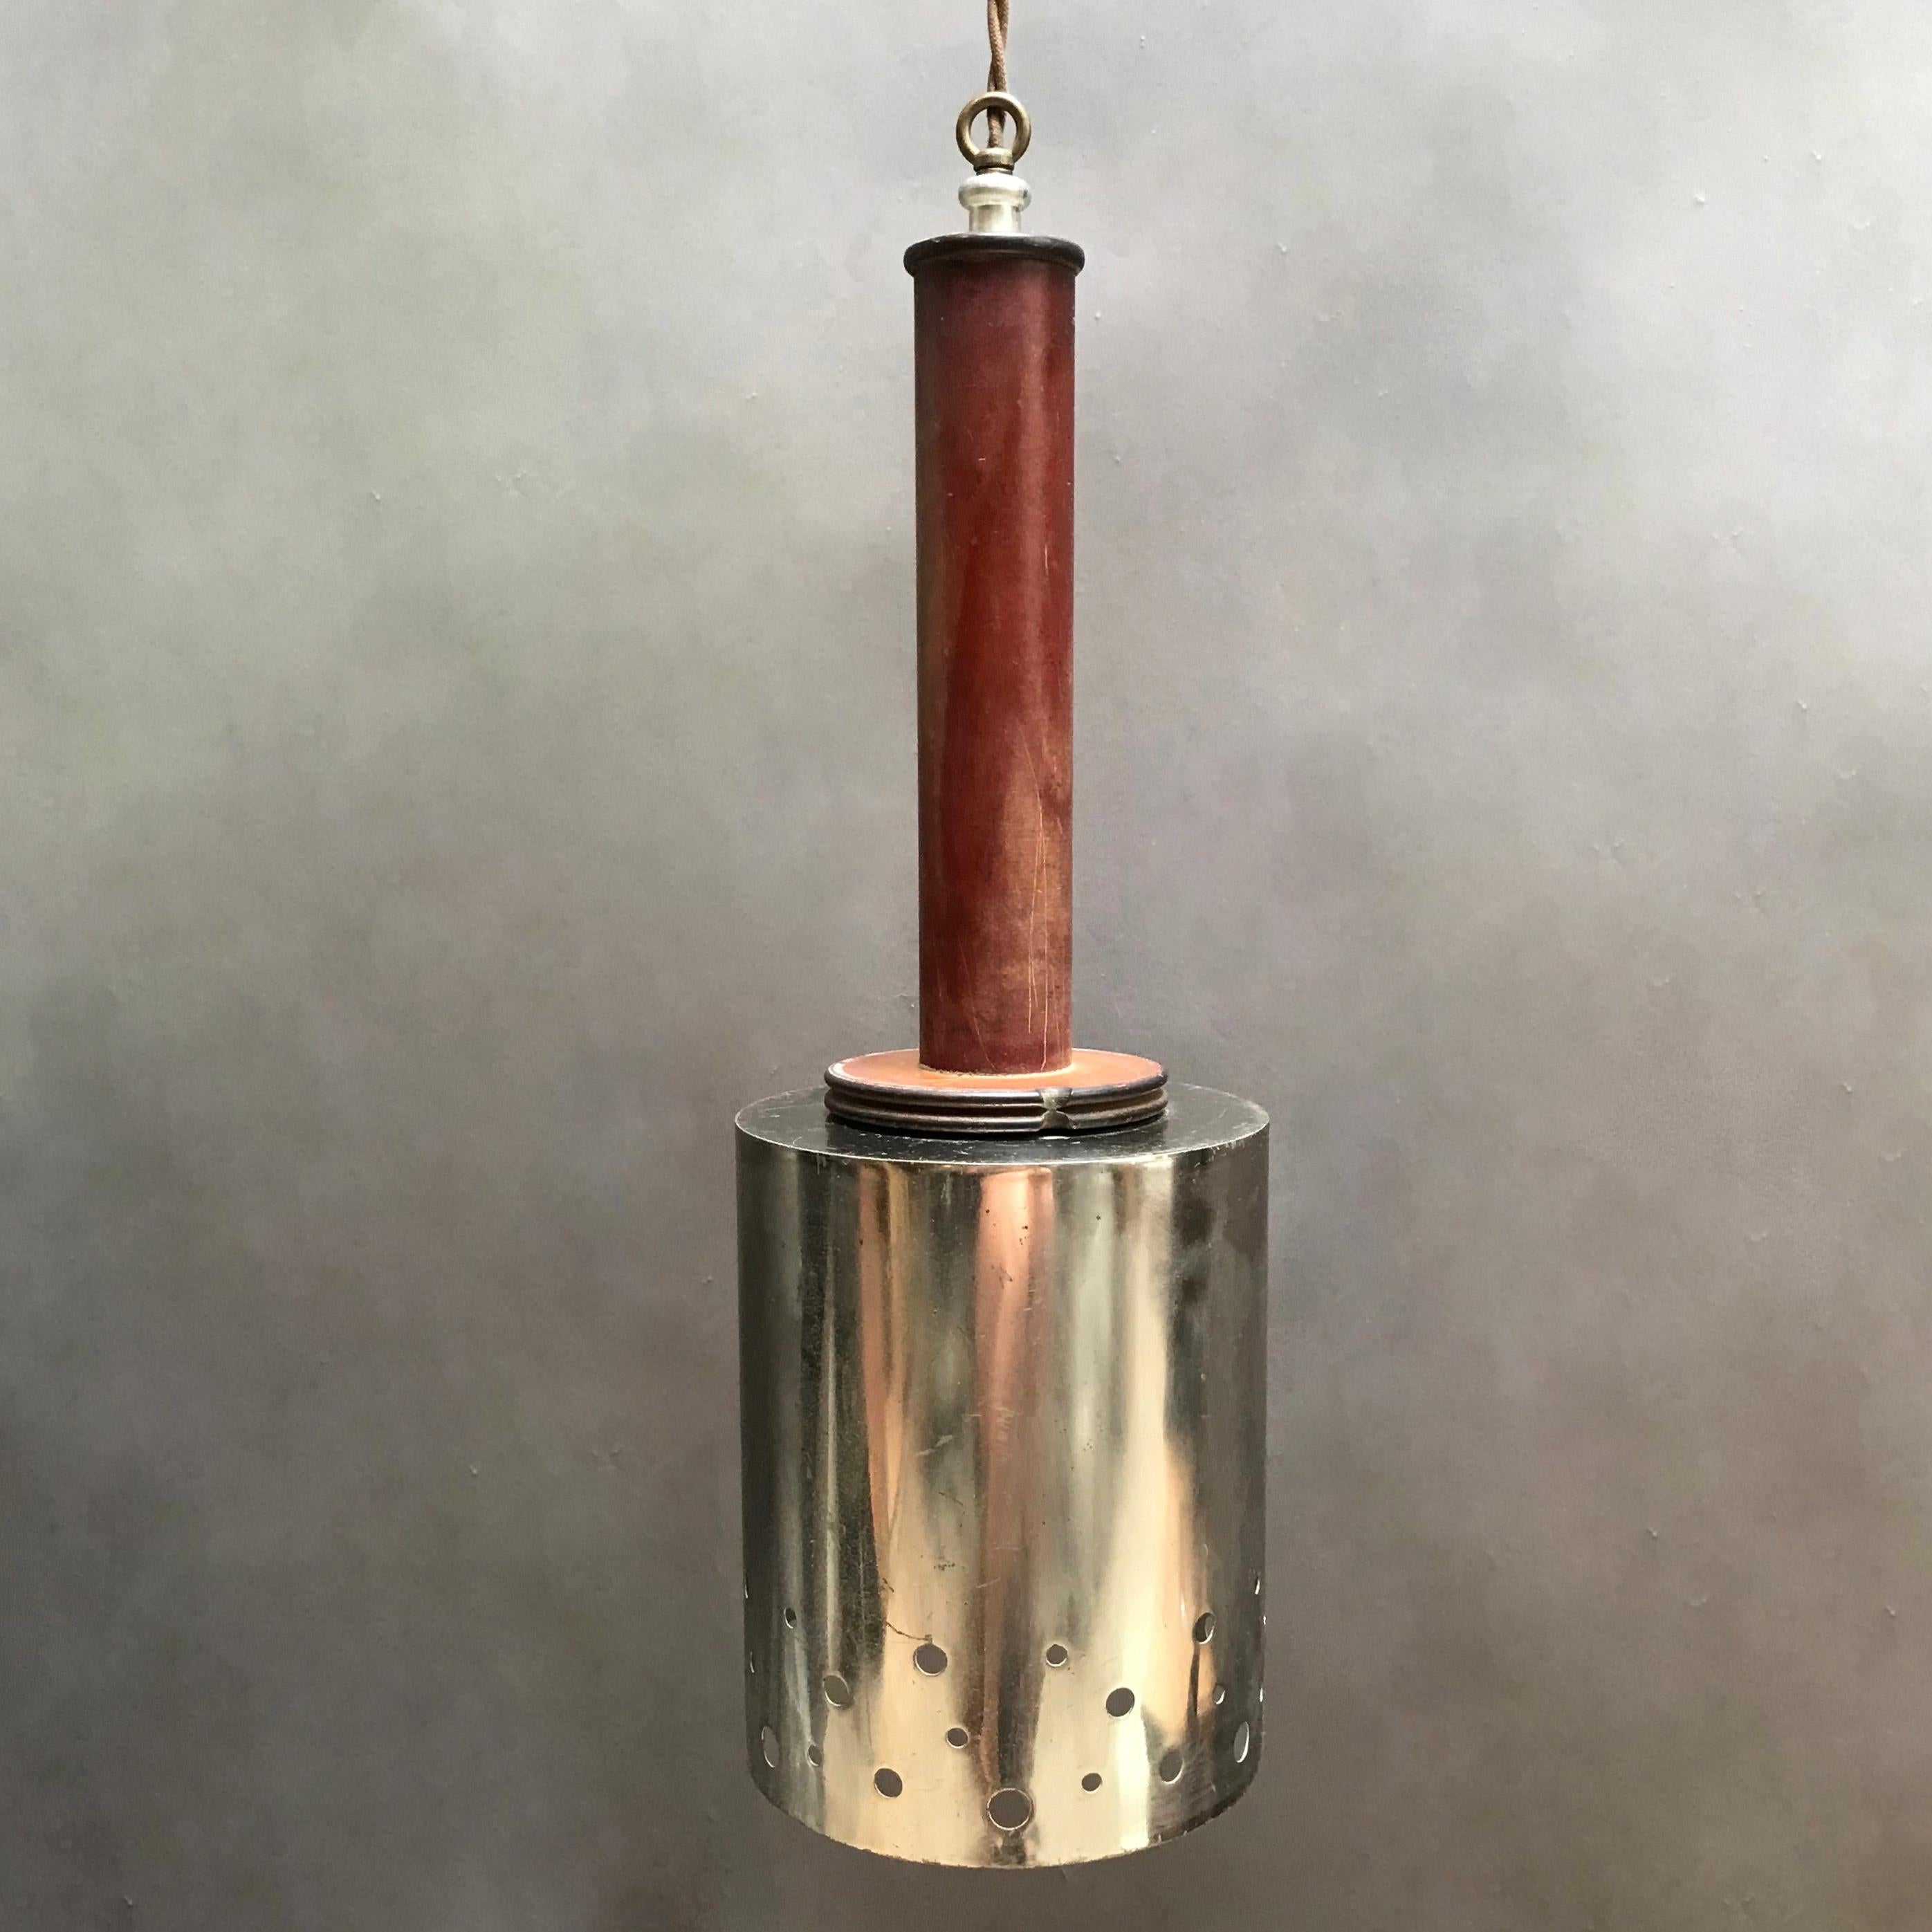 Custom, industrial pendant light assembled from vintage components features a perforated, chrome plated steel shade with masonite stem is wired with 70 inches of braided beige cloth cord with plug to accept up to 100 watt bulb.